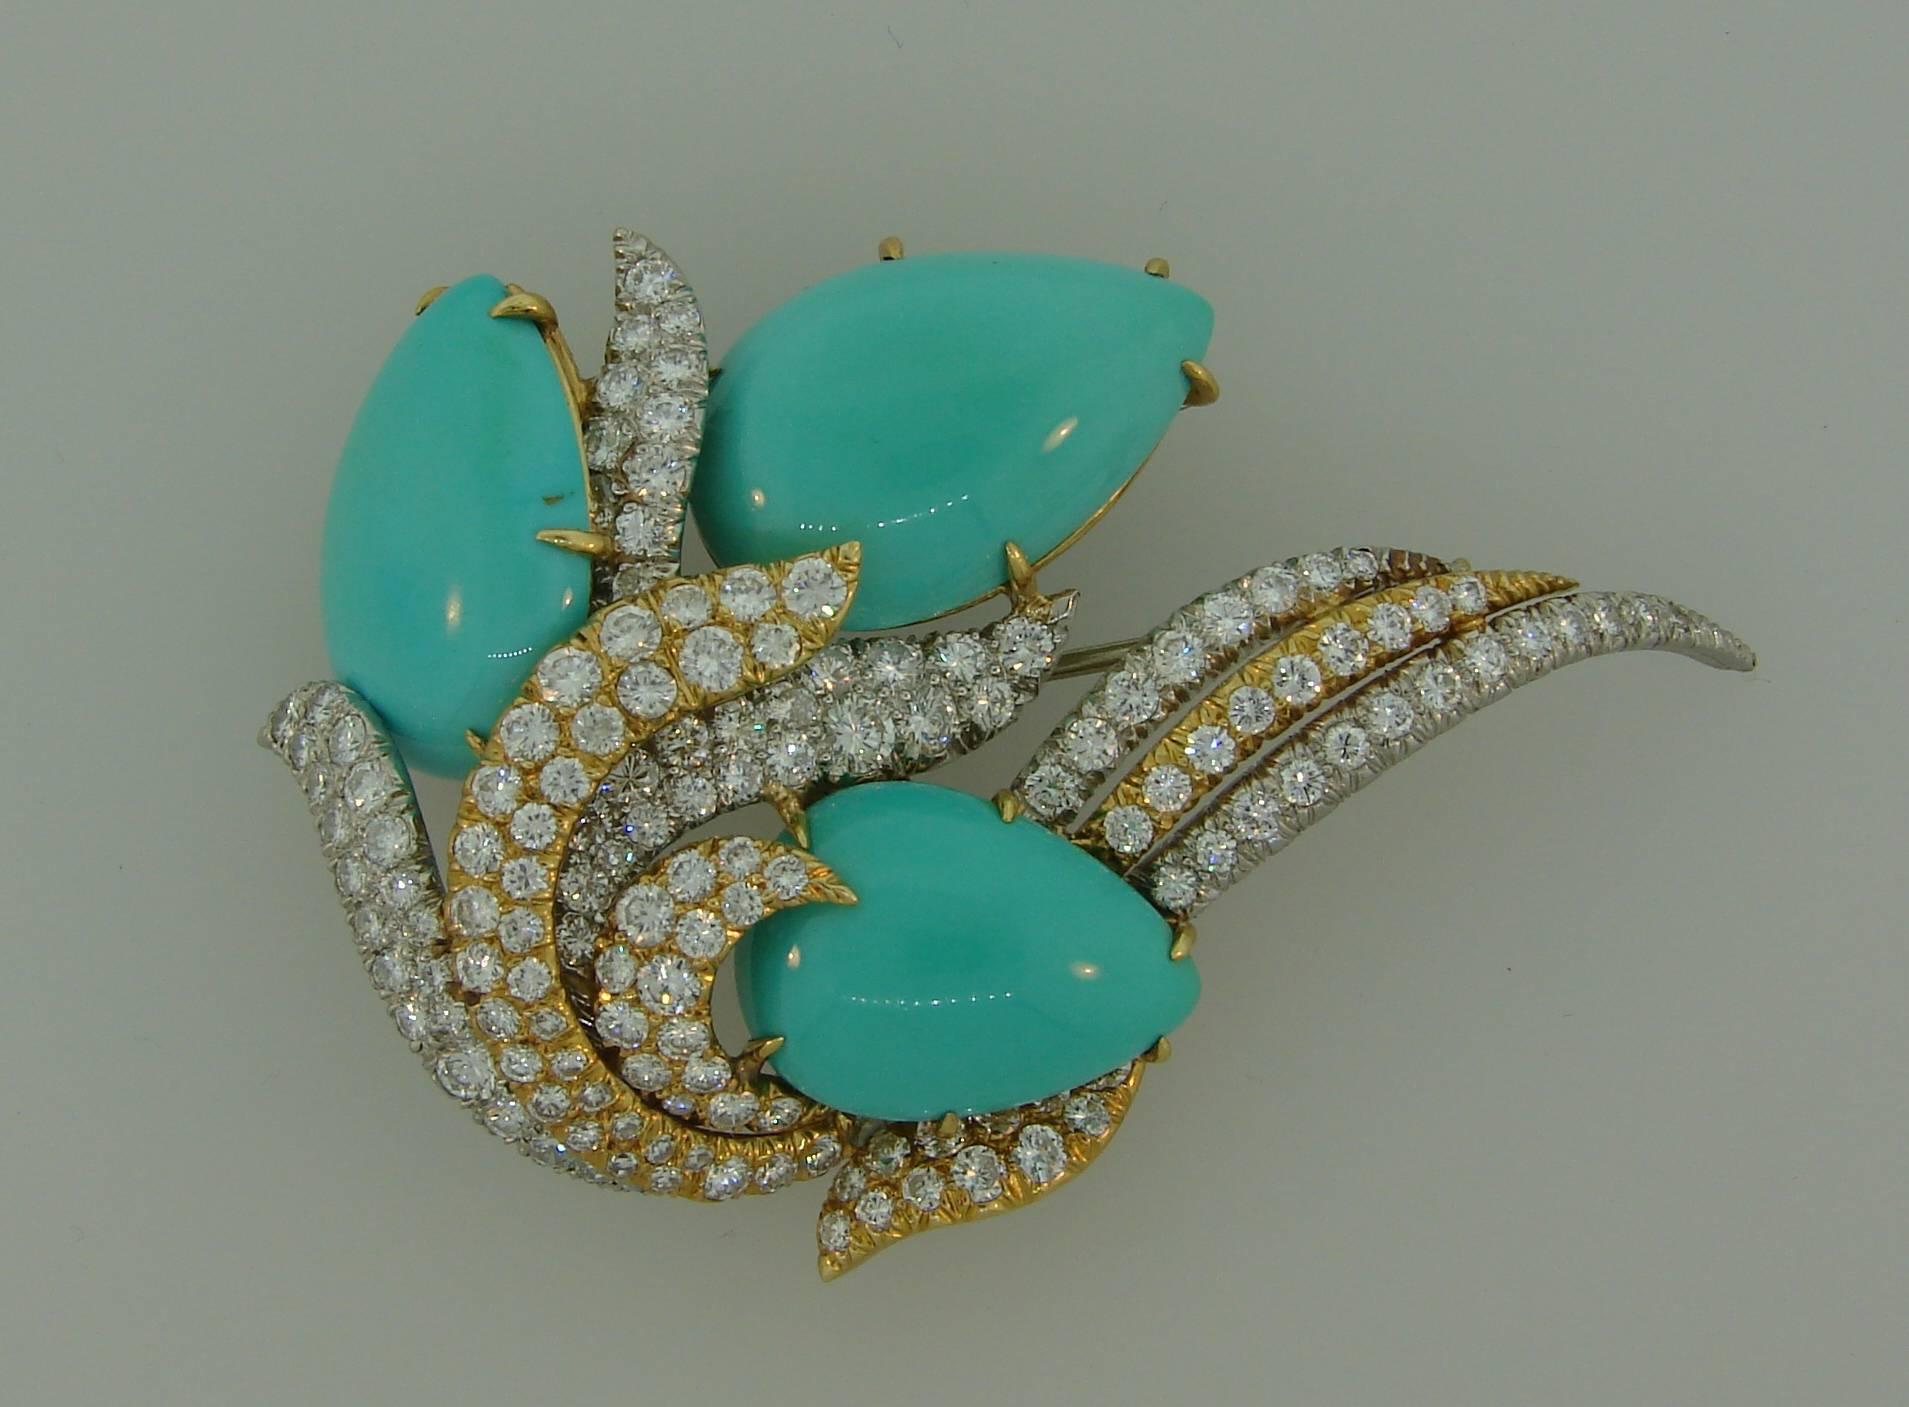 Stunning turquoise and diamond clip created by David Webb in the 1980s. It can also be worn as a pendant. Chic and elegant, the piece is a great addition to your jewelry collection. 
The brooch is made of platinum and 18 karat yellow gold, features